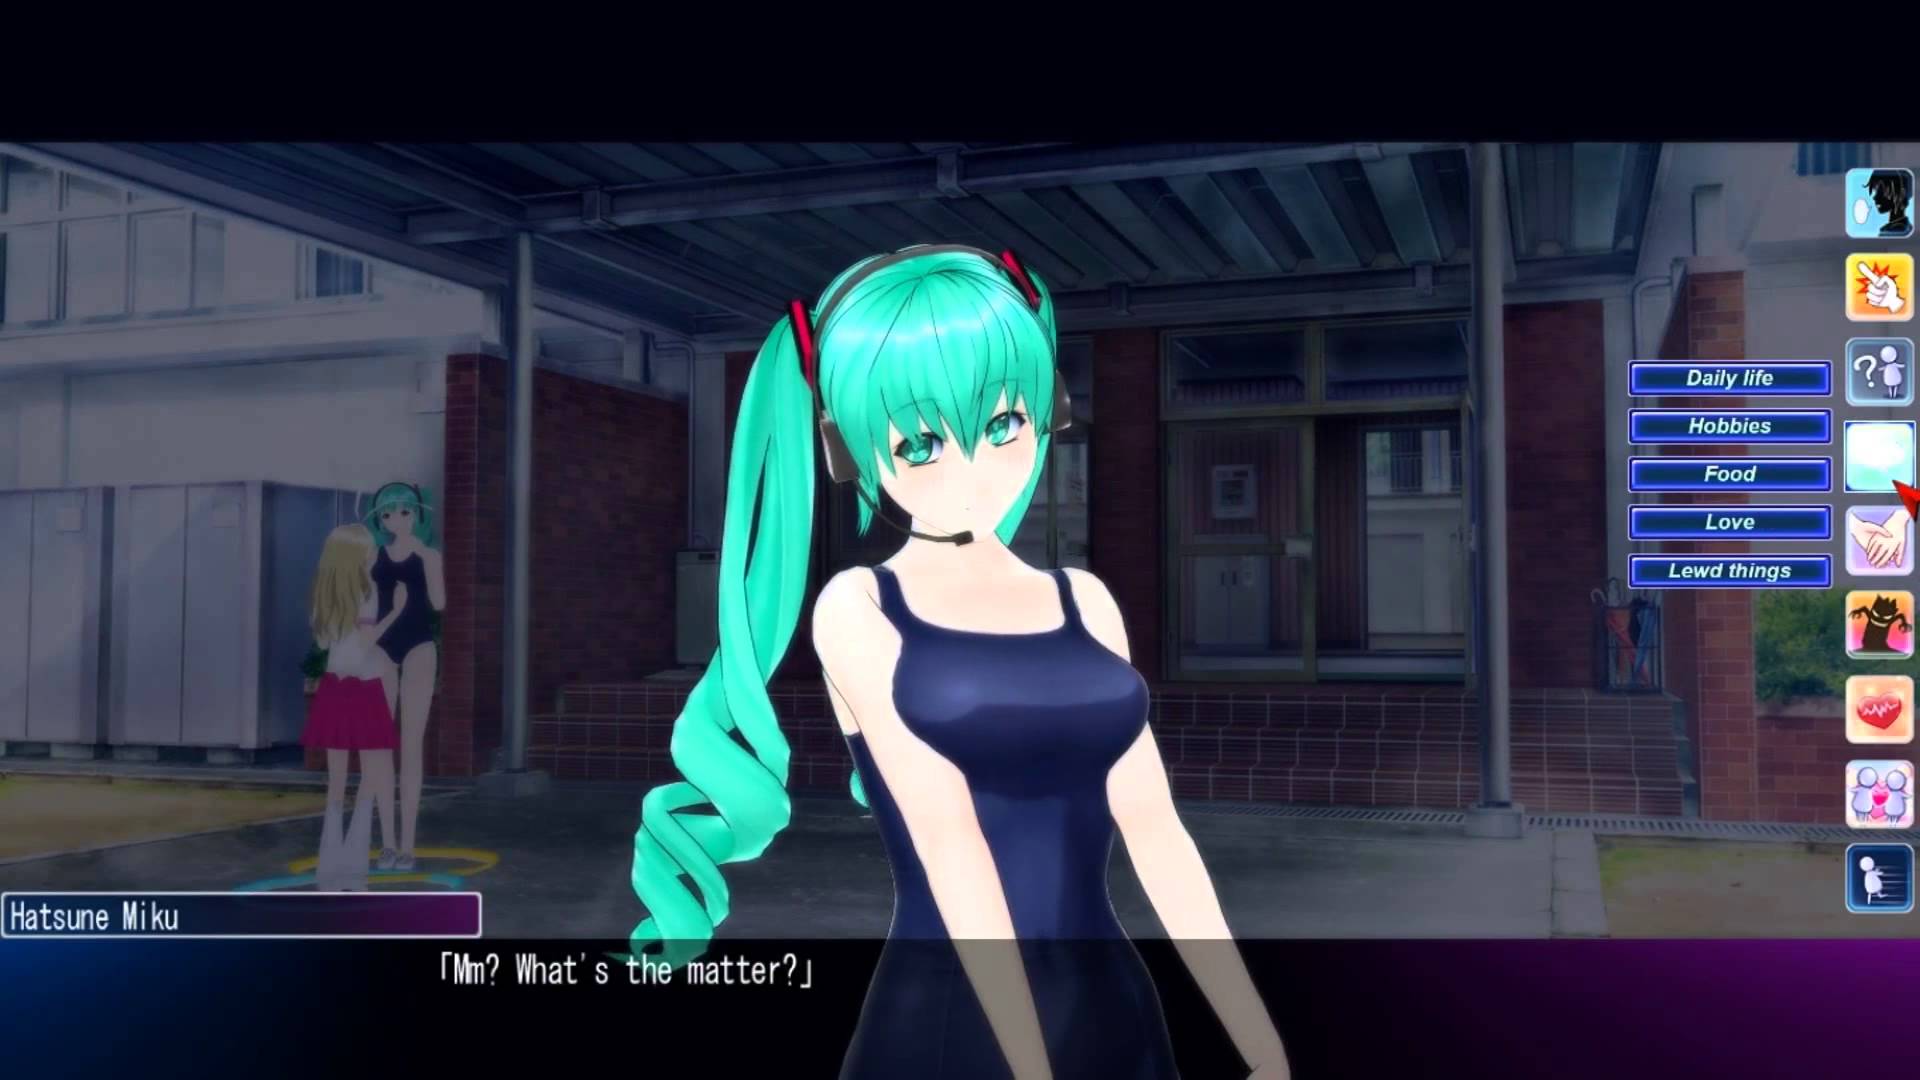 A femme appearing character with an unnatural hair colour is wearing a swimsuit and headset microphone in the foreground. A dialogue box overlay shows her name is Hatsune Miku, and she is saying, 'Mm? What's the matter?'